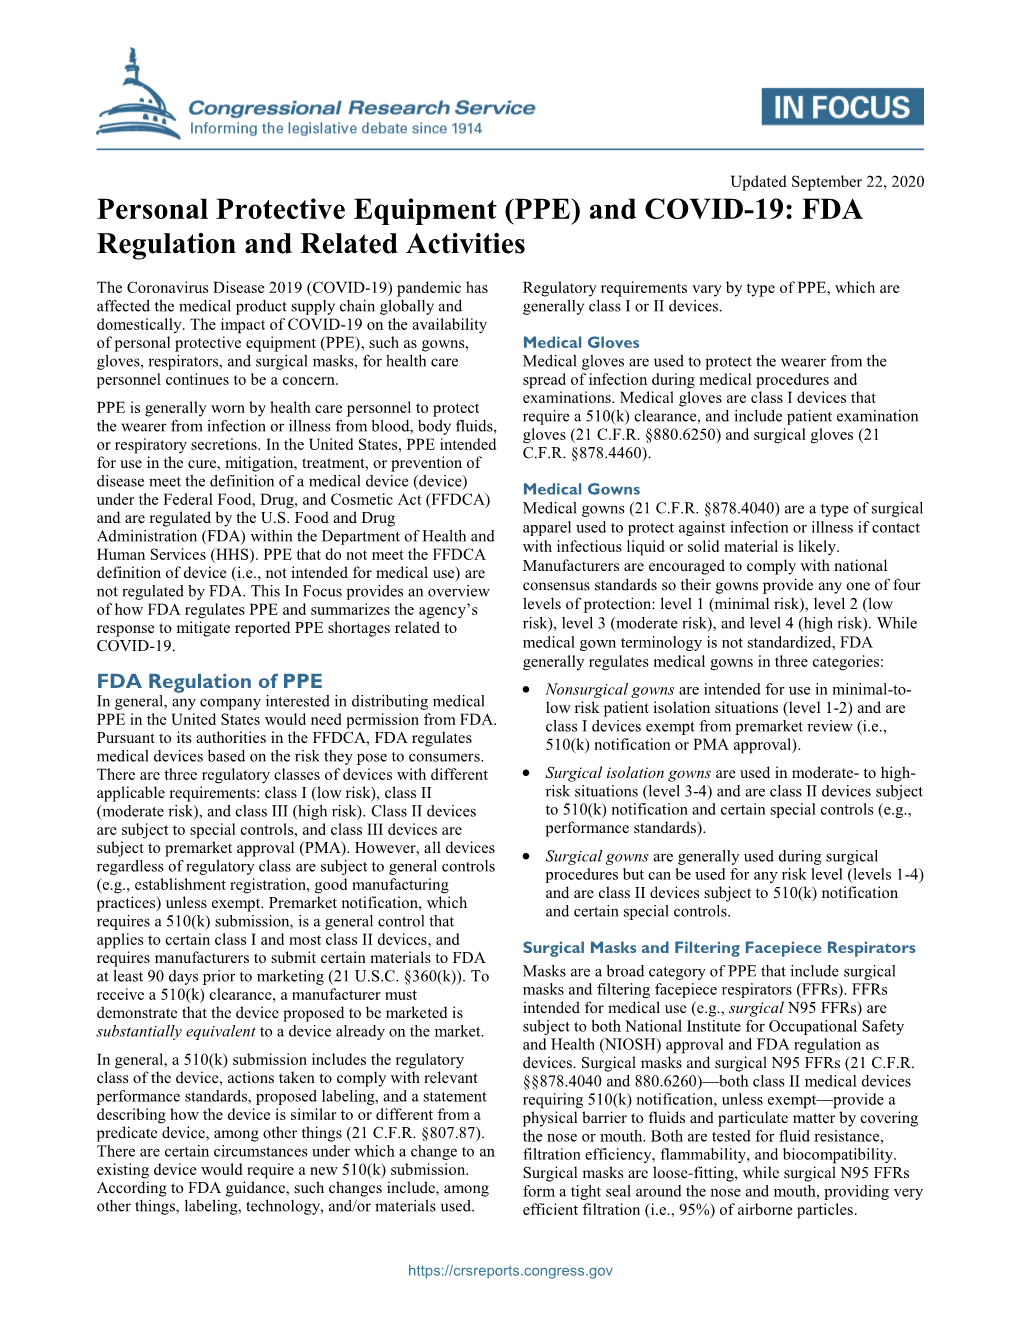 Personal Protective Equipment (PPE) and COVID-19: FDA Regulation and Related Activities